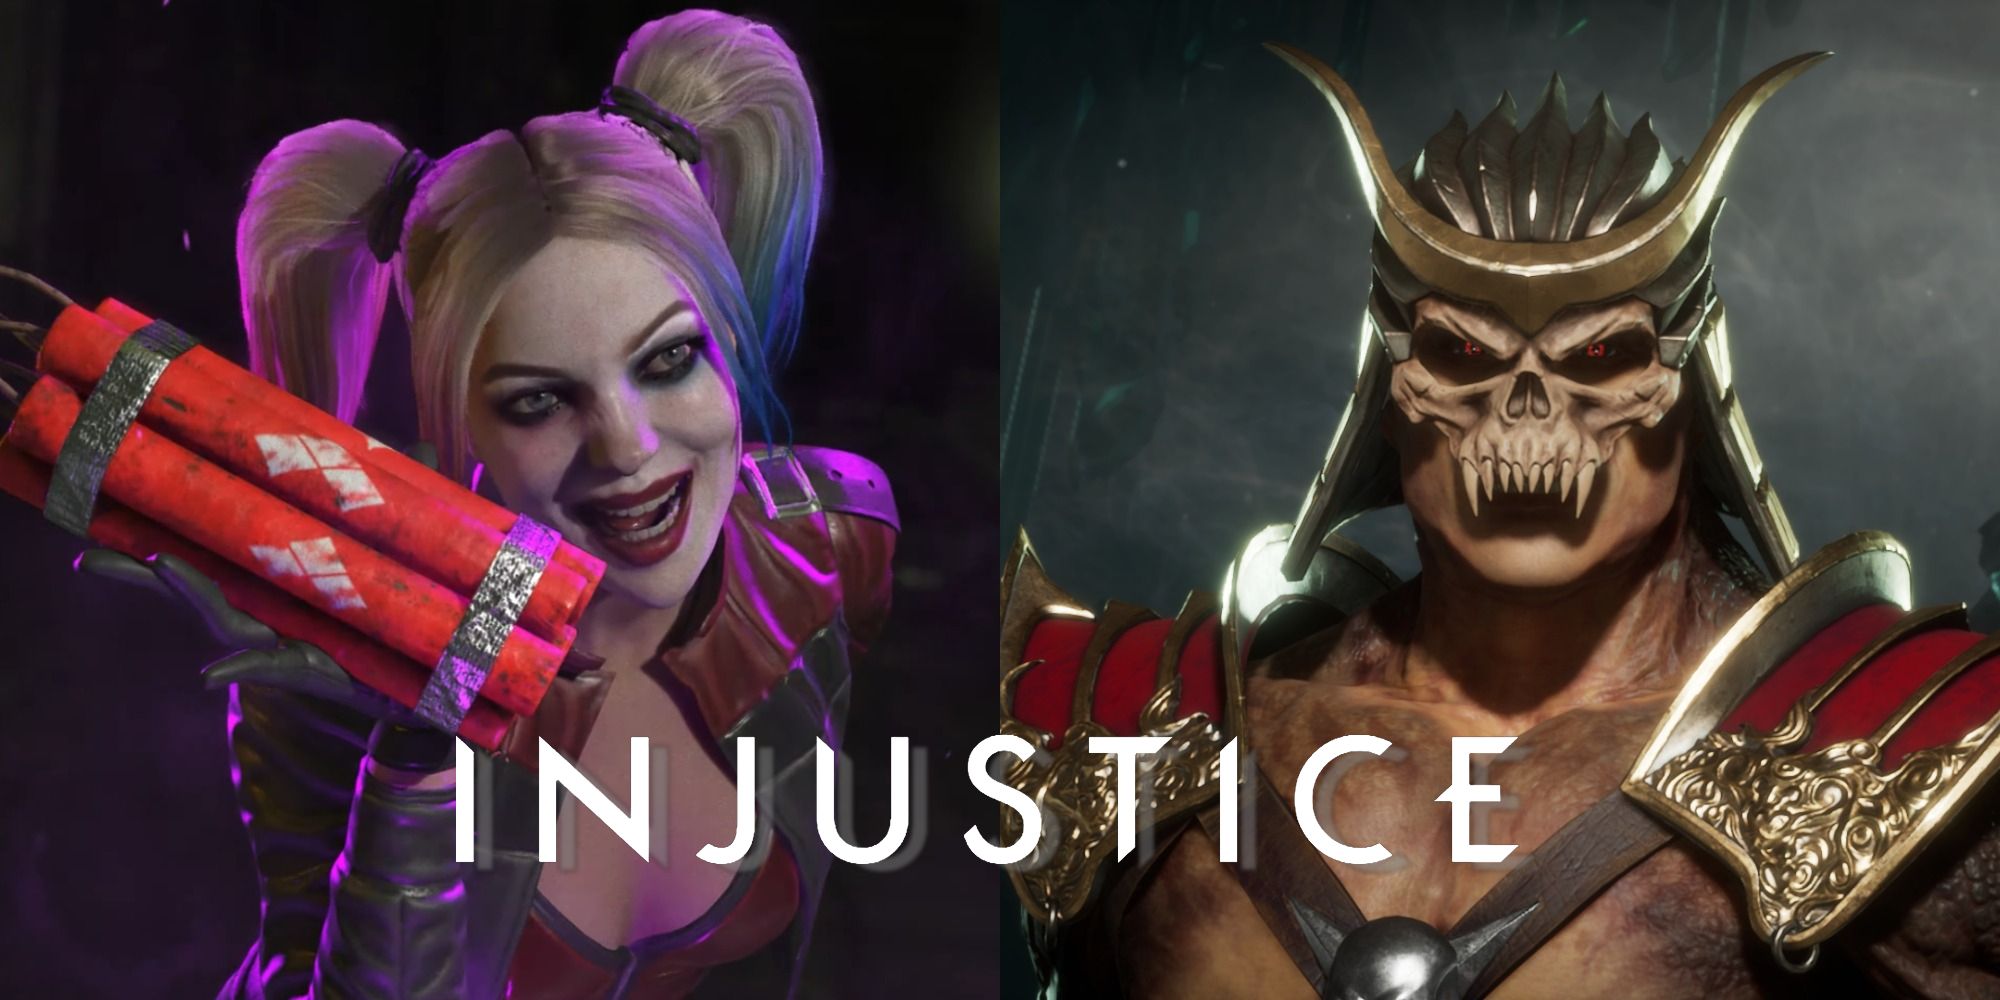 Split image of Harley Quinn with TNT in Injustice 2 and Shao Kahn in Mortal Kombat 11